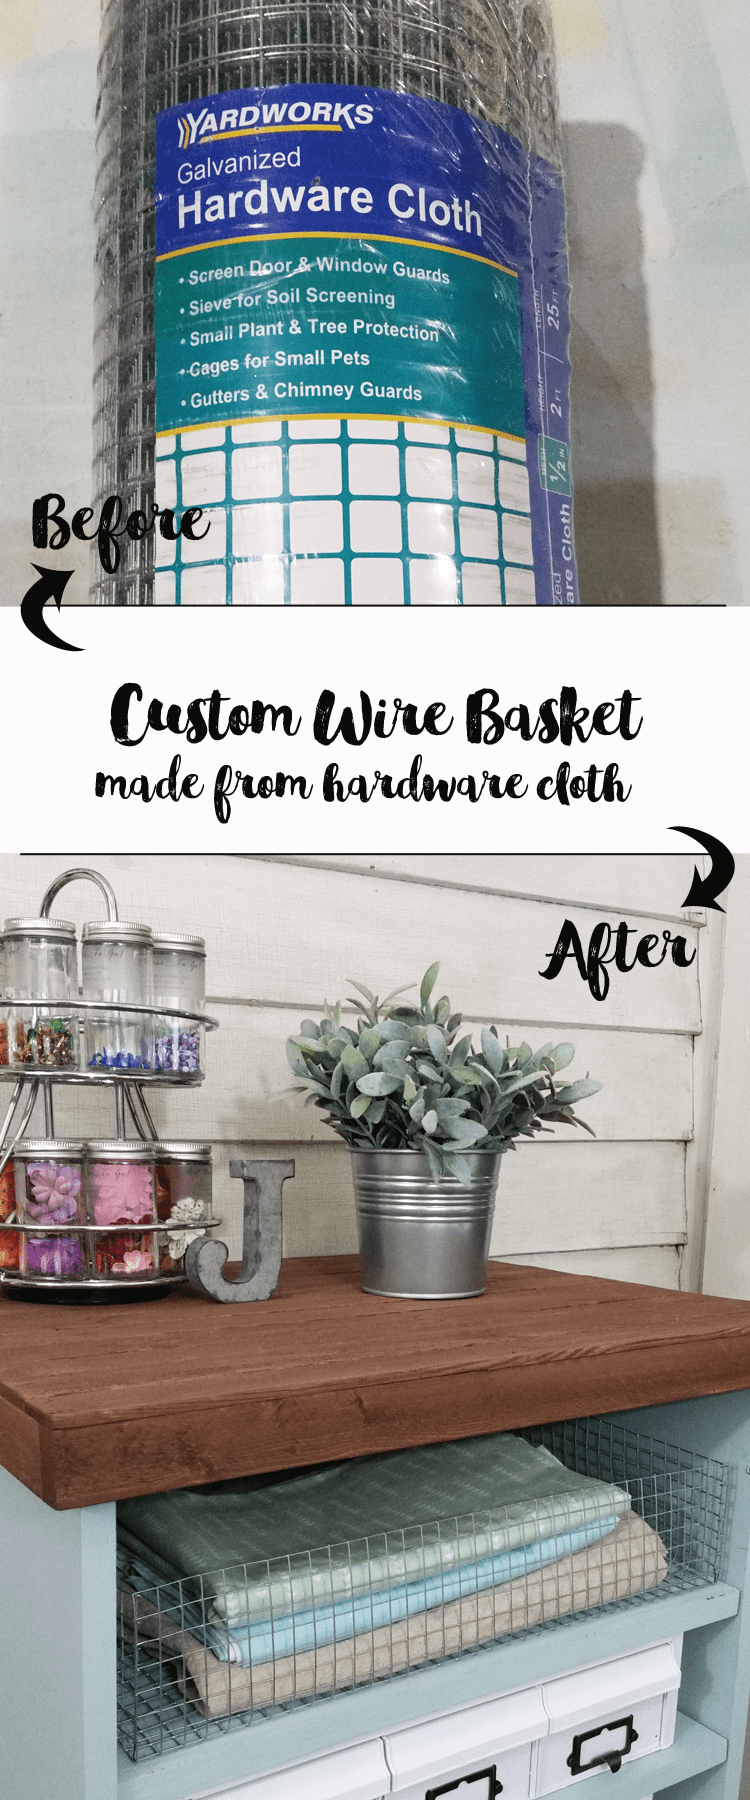 How To Create Your Own Wire Baskets - www.michellejdesigns.com - It seems I can never find the right sized wire basket for my space. This tutorial will teach you how to create your own!